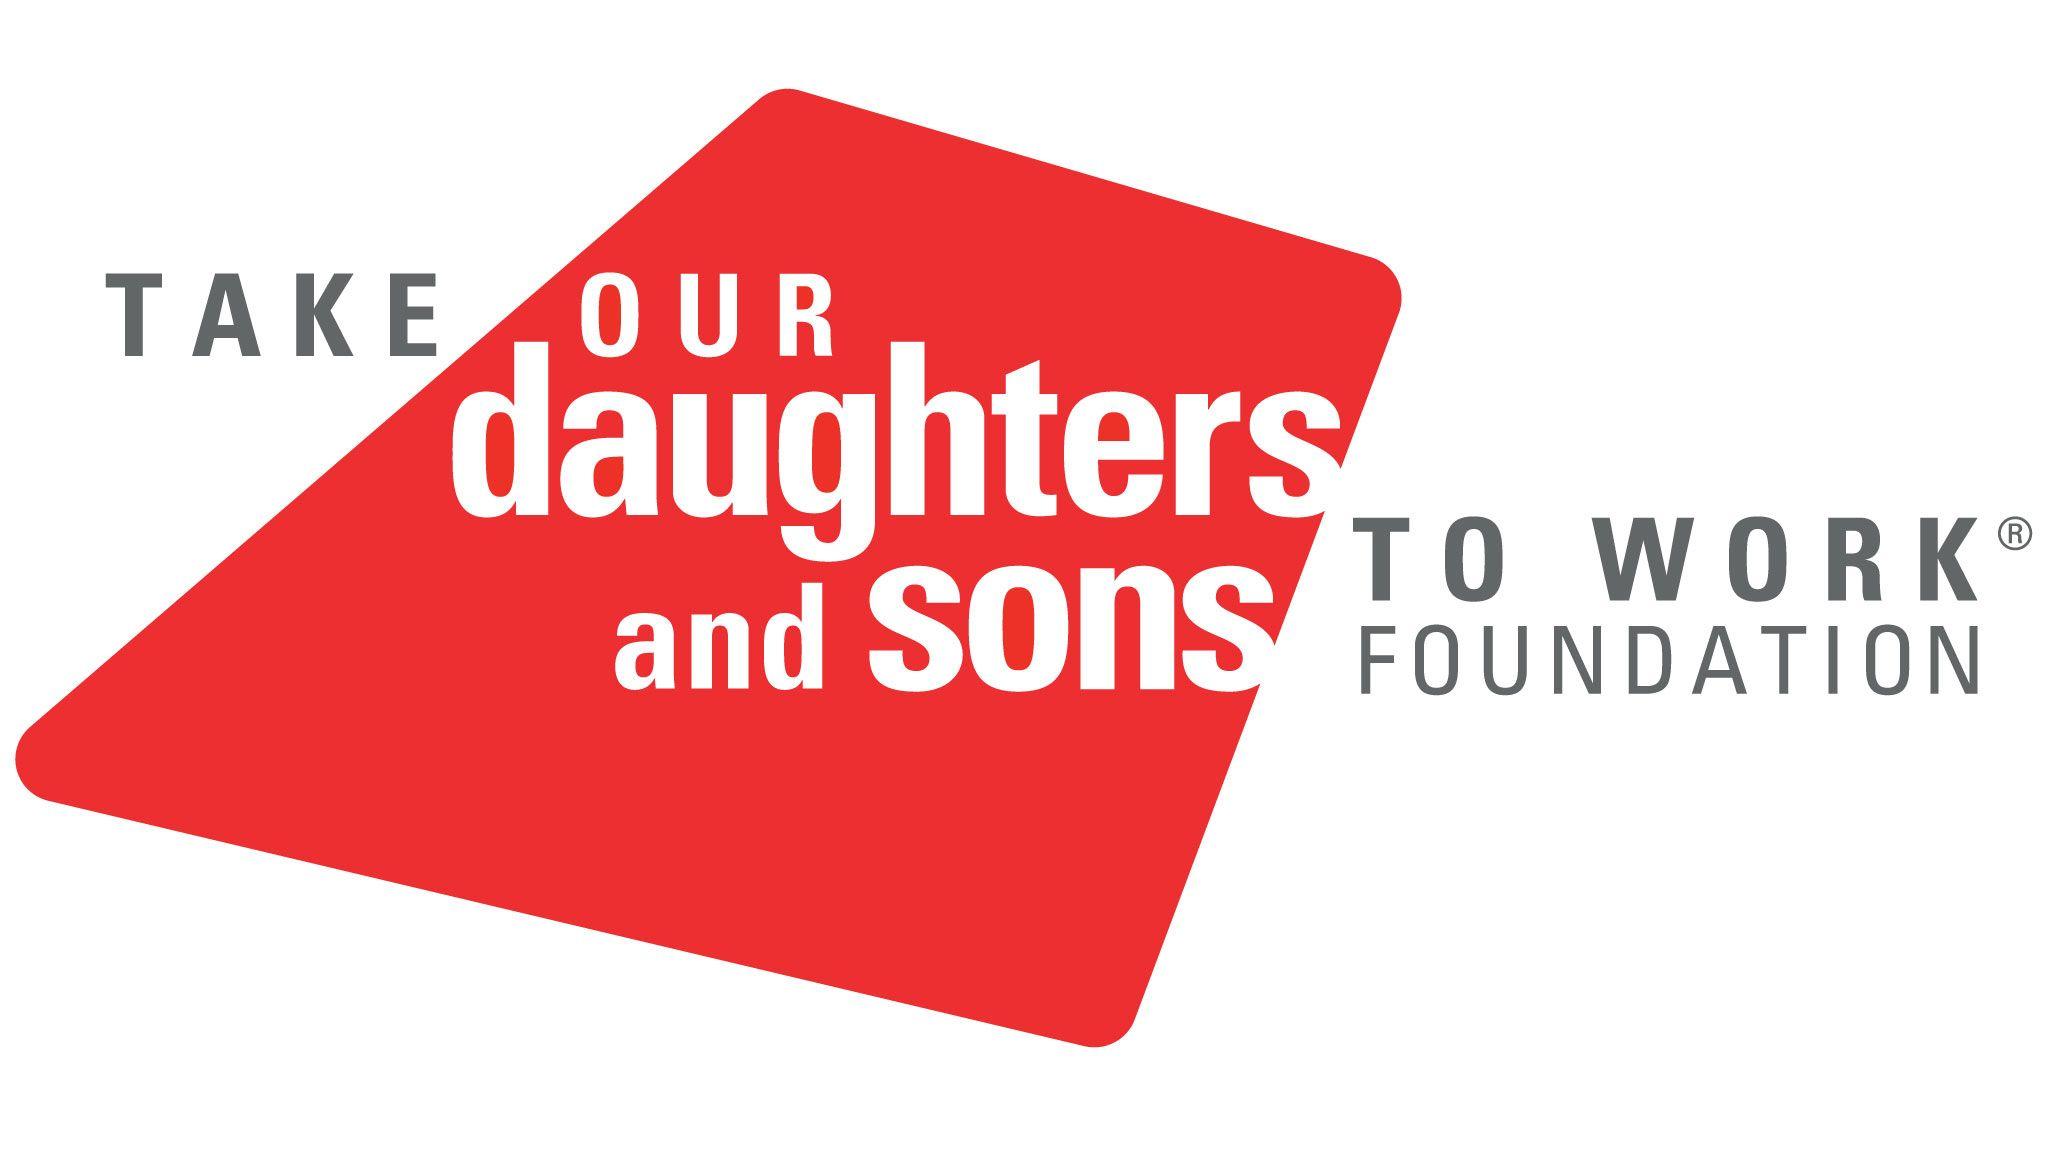 Day Logo - Take Our Daughters and Sons to Work Foundation: Current Logos & Posters